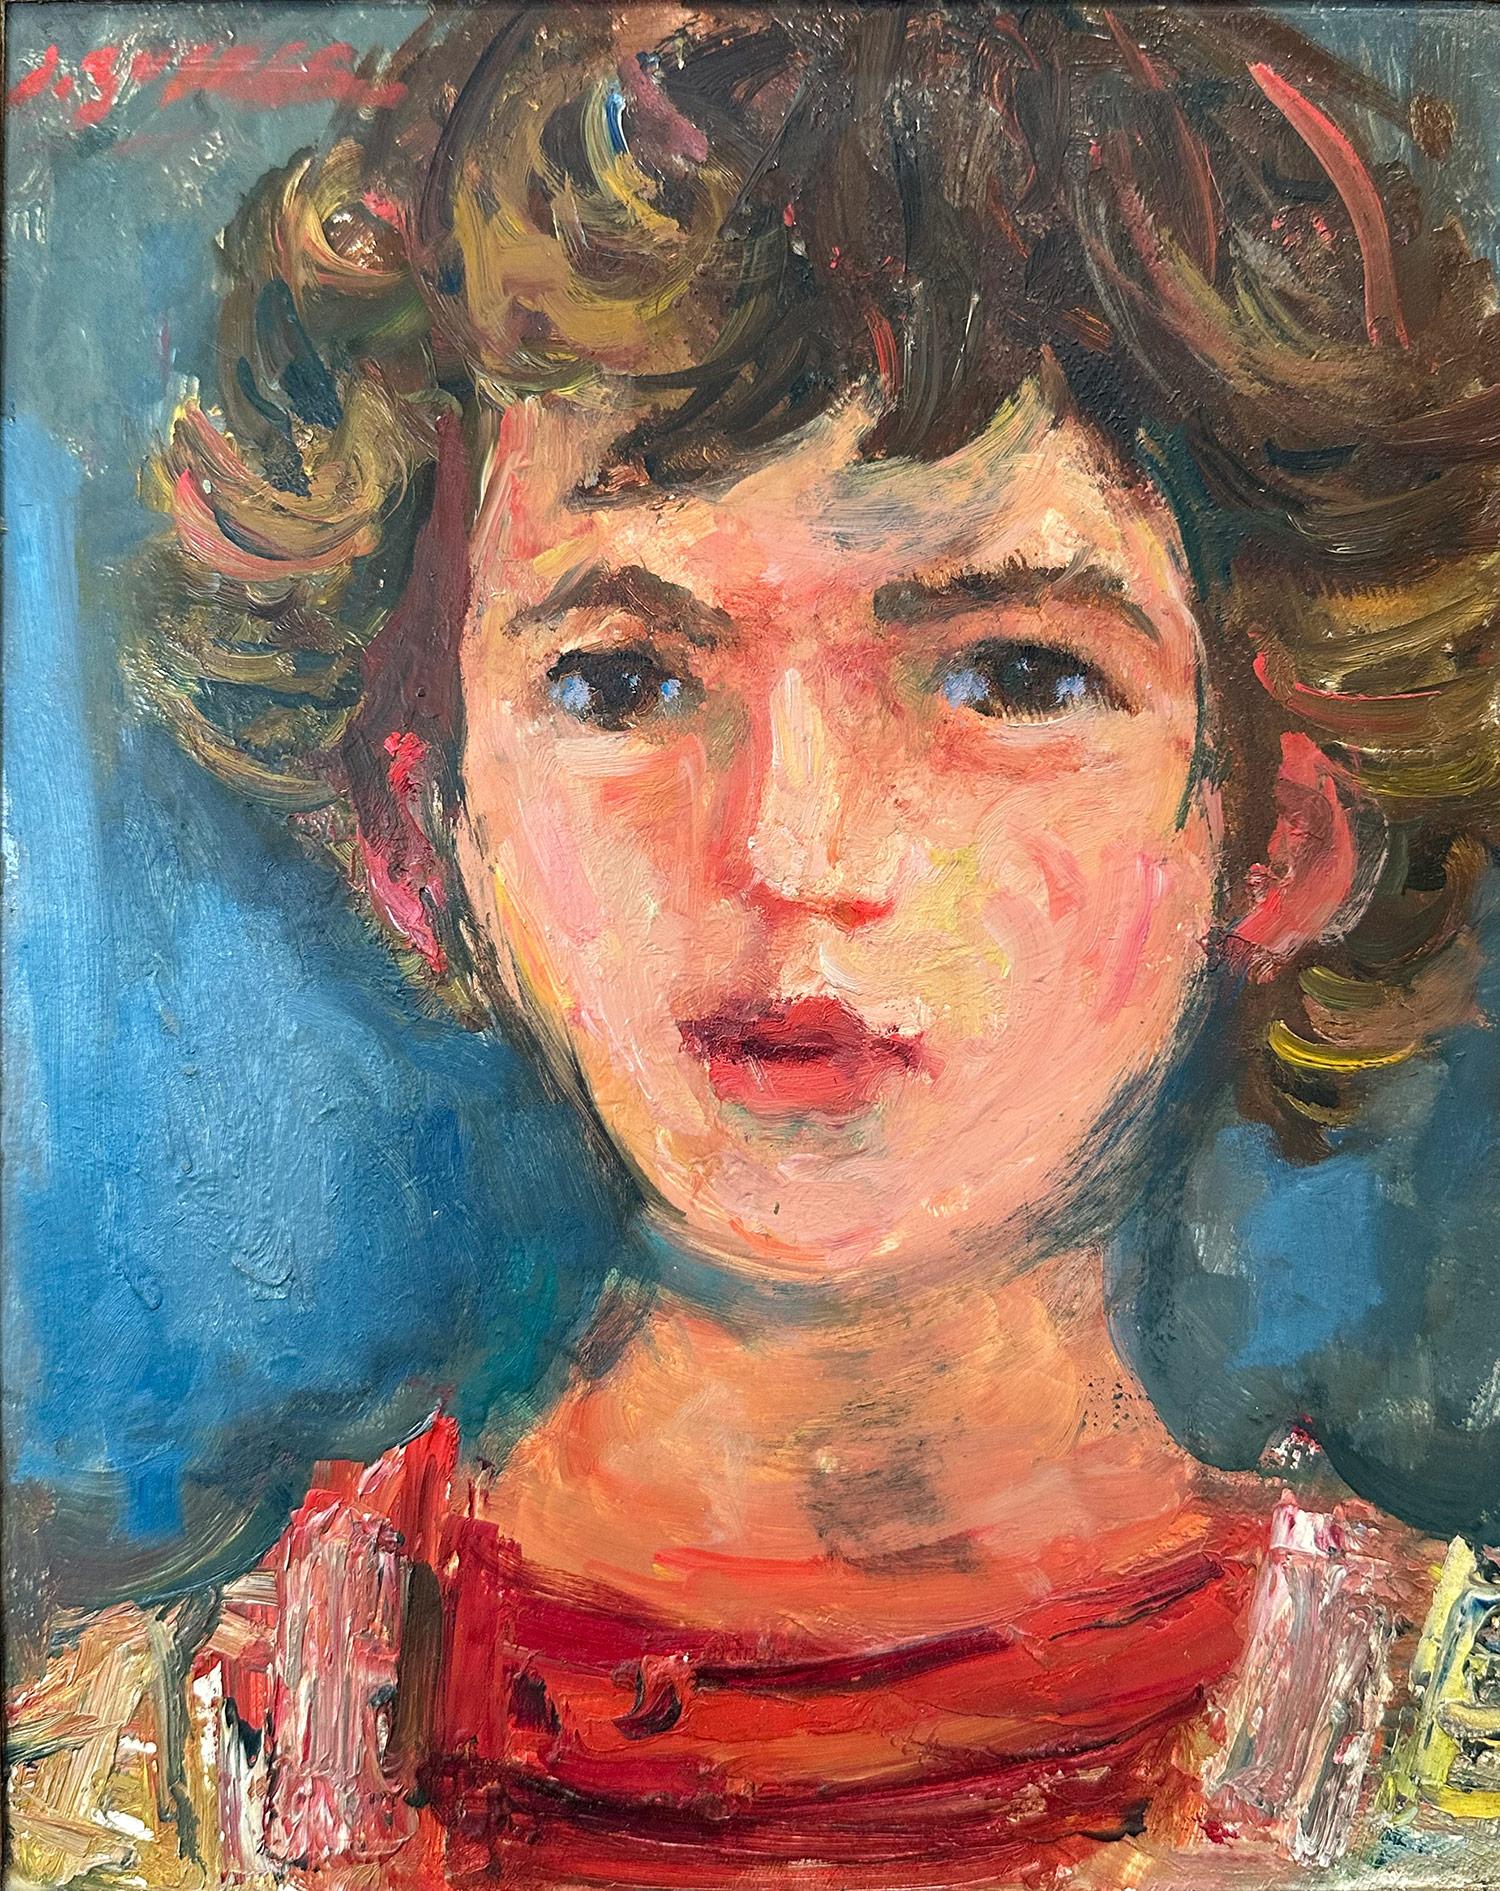 This painting depicts a whimsical portrait of a young girl with brown hair against a light blue background. The bright colors used and quick brush strokes are what makes this painting so attractive and desirable. The piece is done in a highly